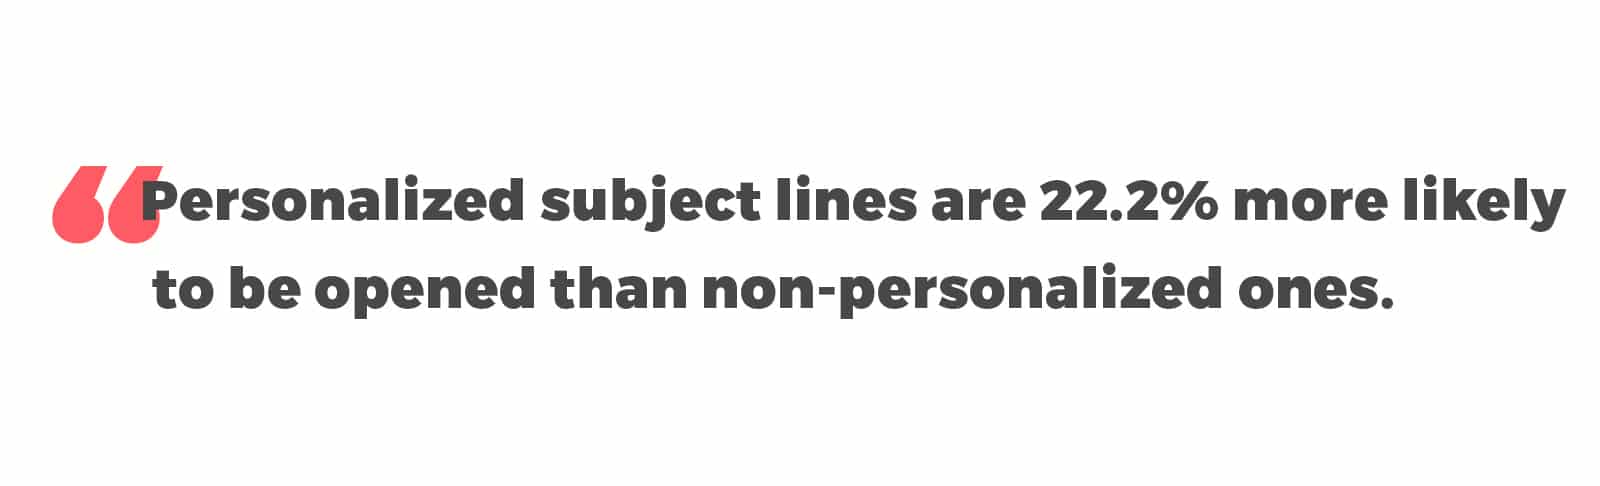 personalized-subject-lines-are-22.2%-more-likely-to-be-opened-than-non-personalized-ones.